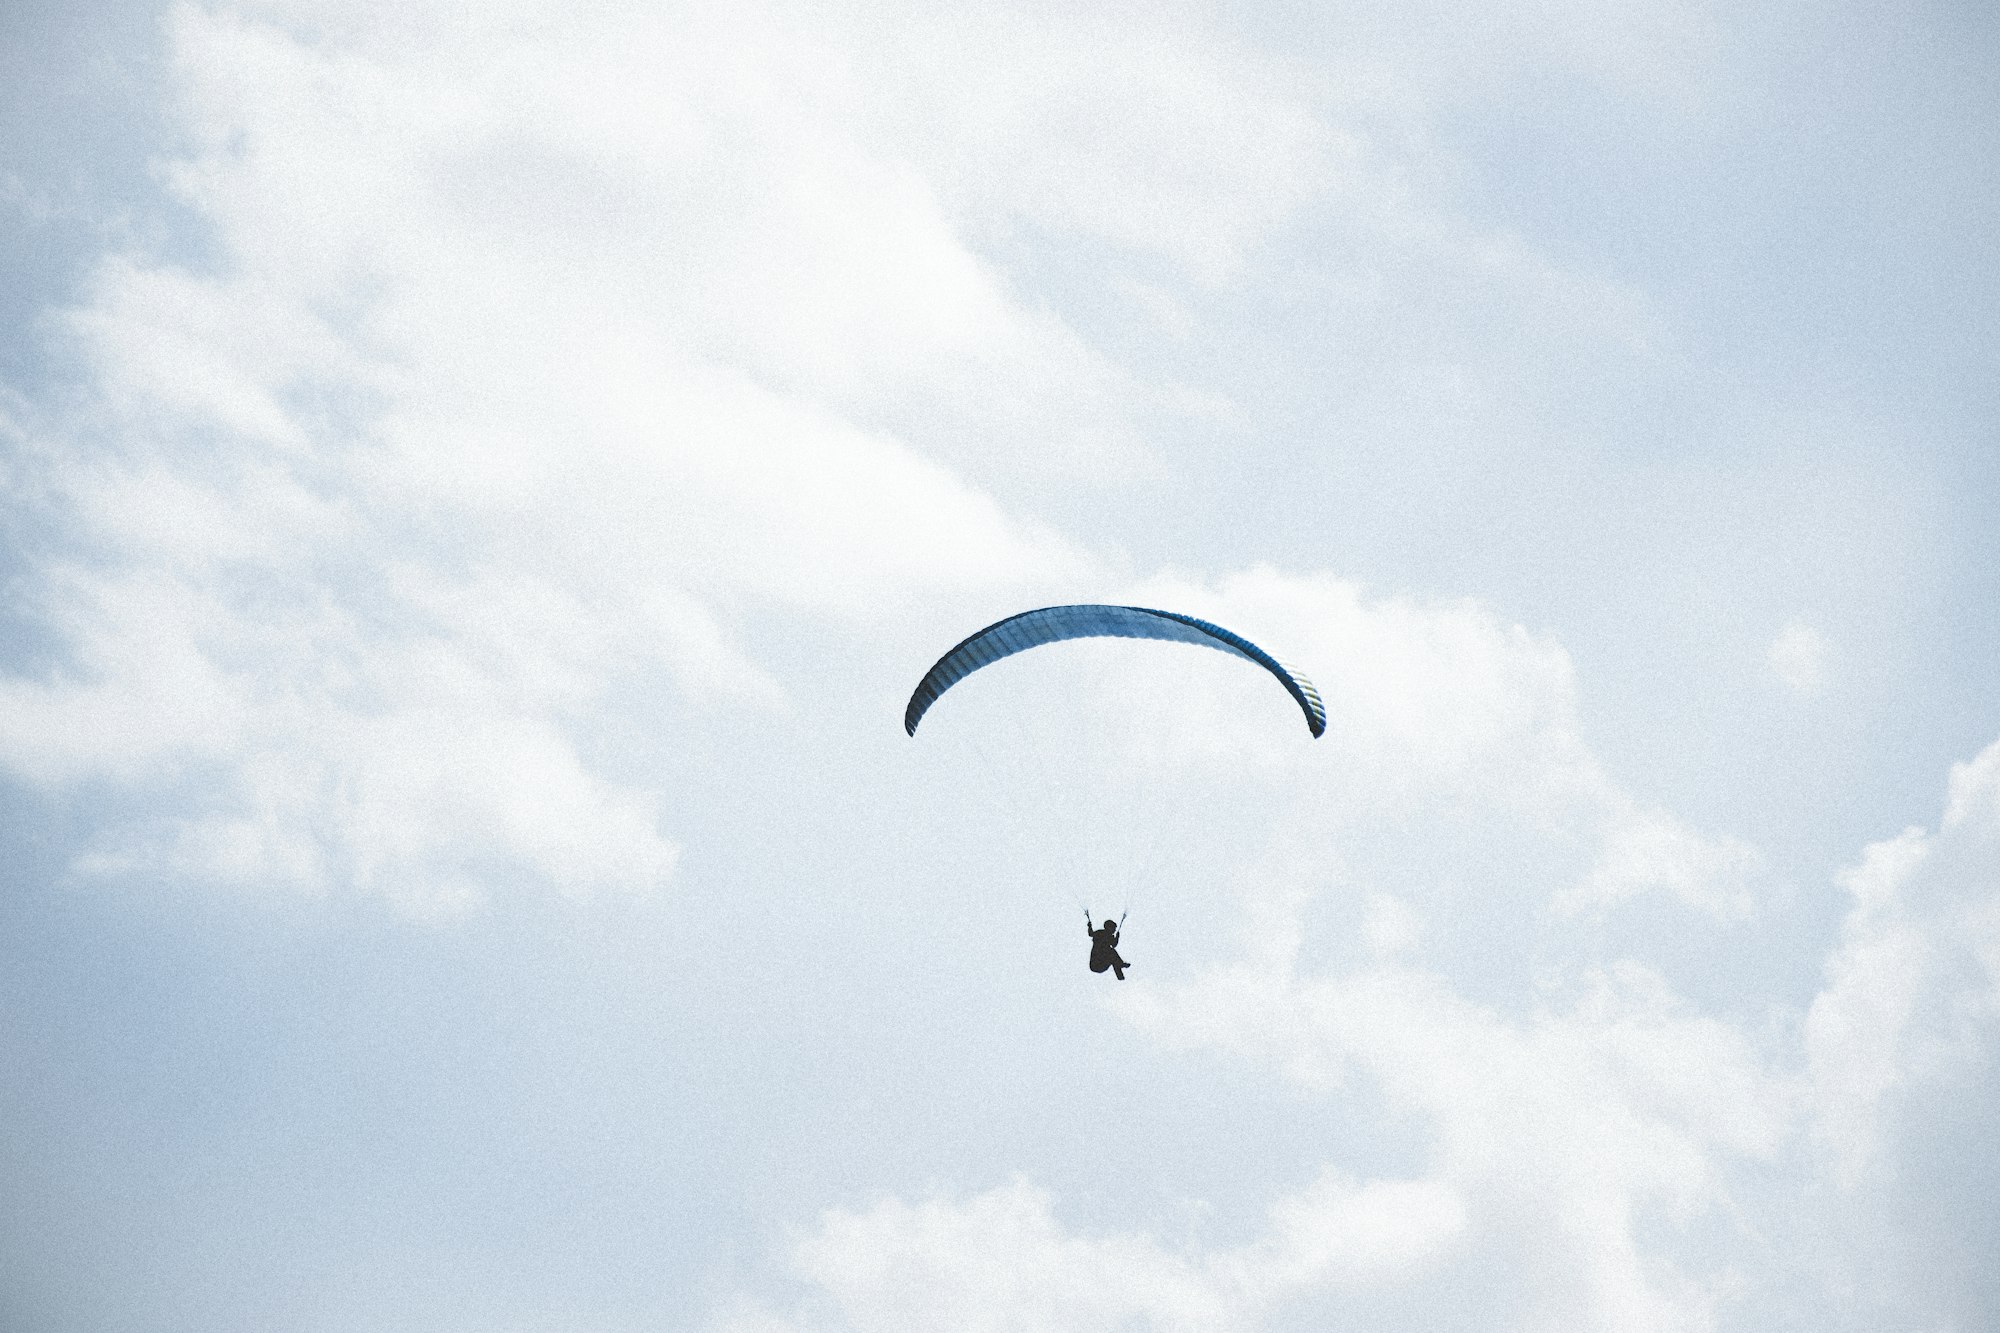 Becoming a paraglider